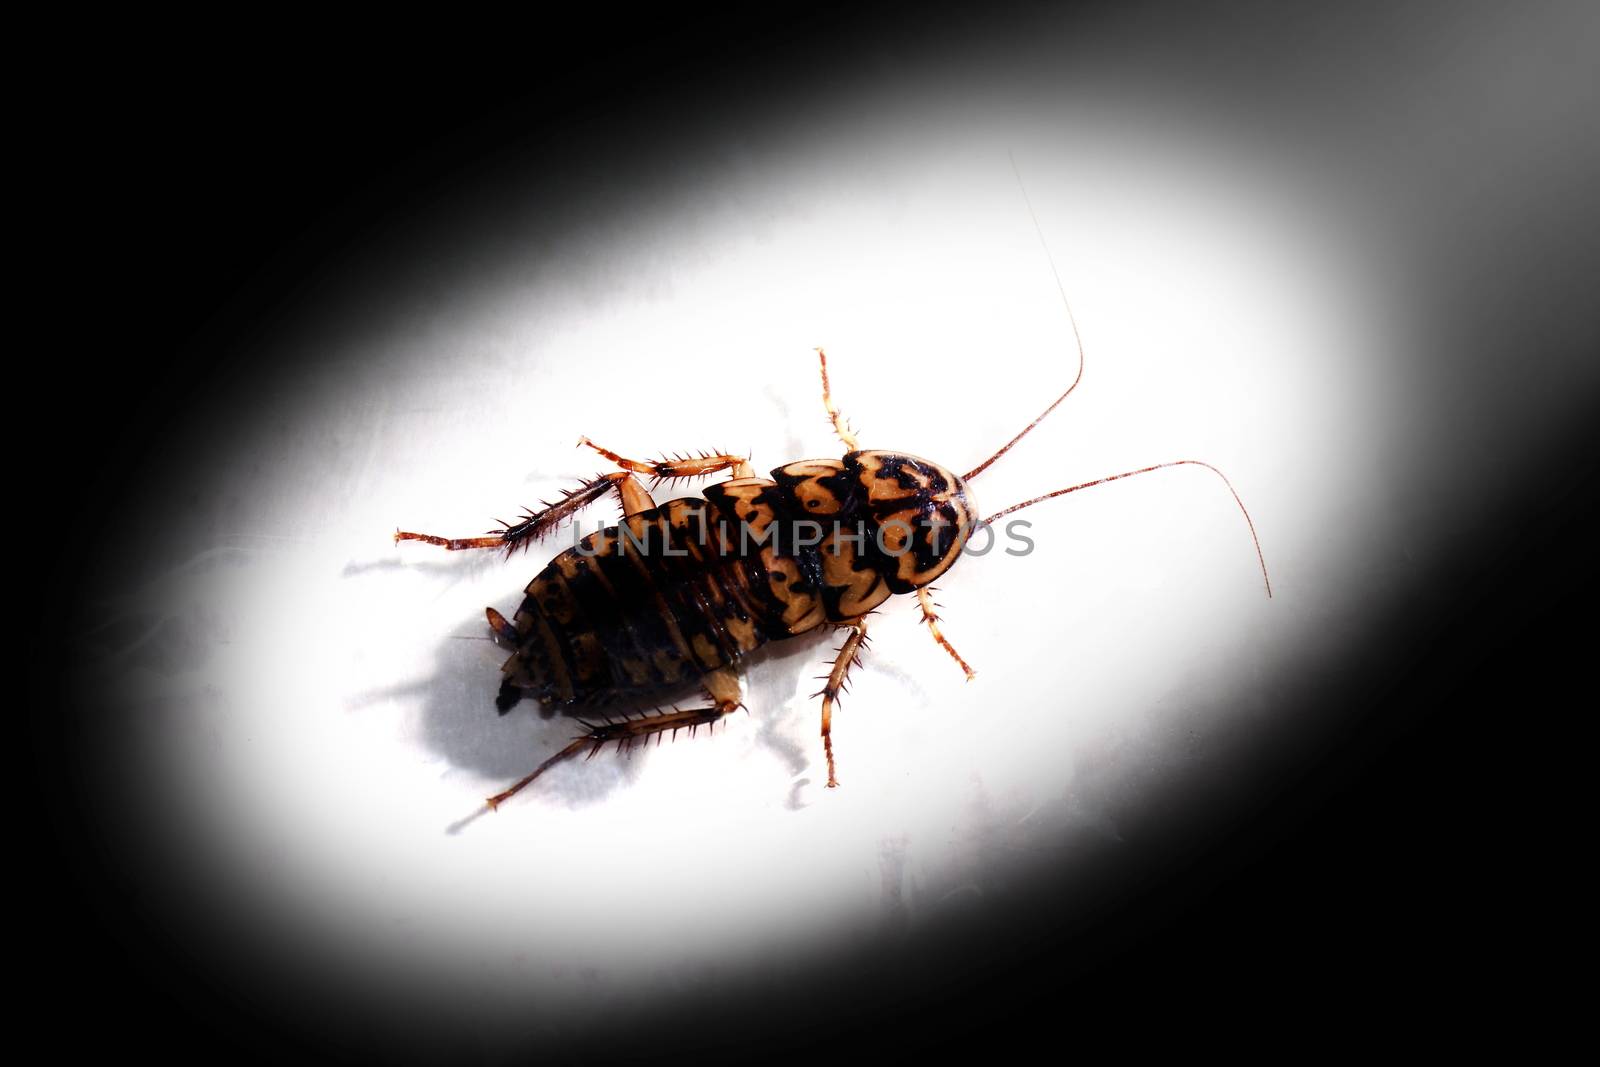 Cockroach, Cockroaches, Roach in the light on dark black shadow background